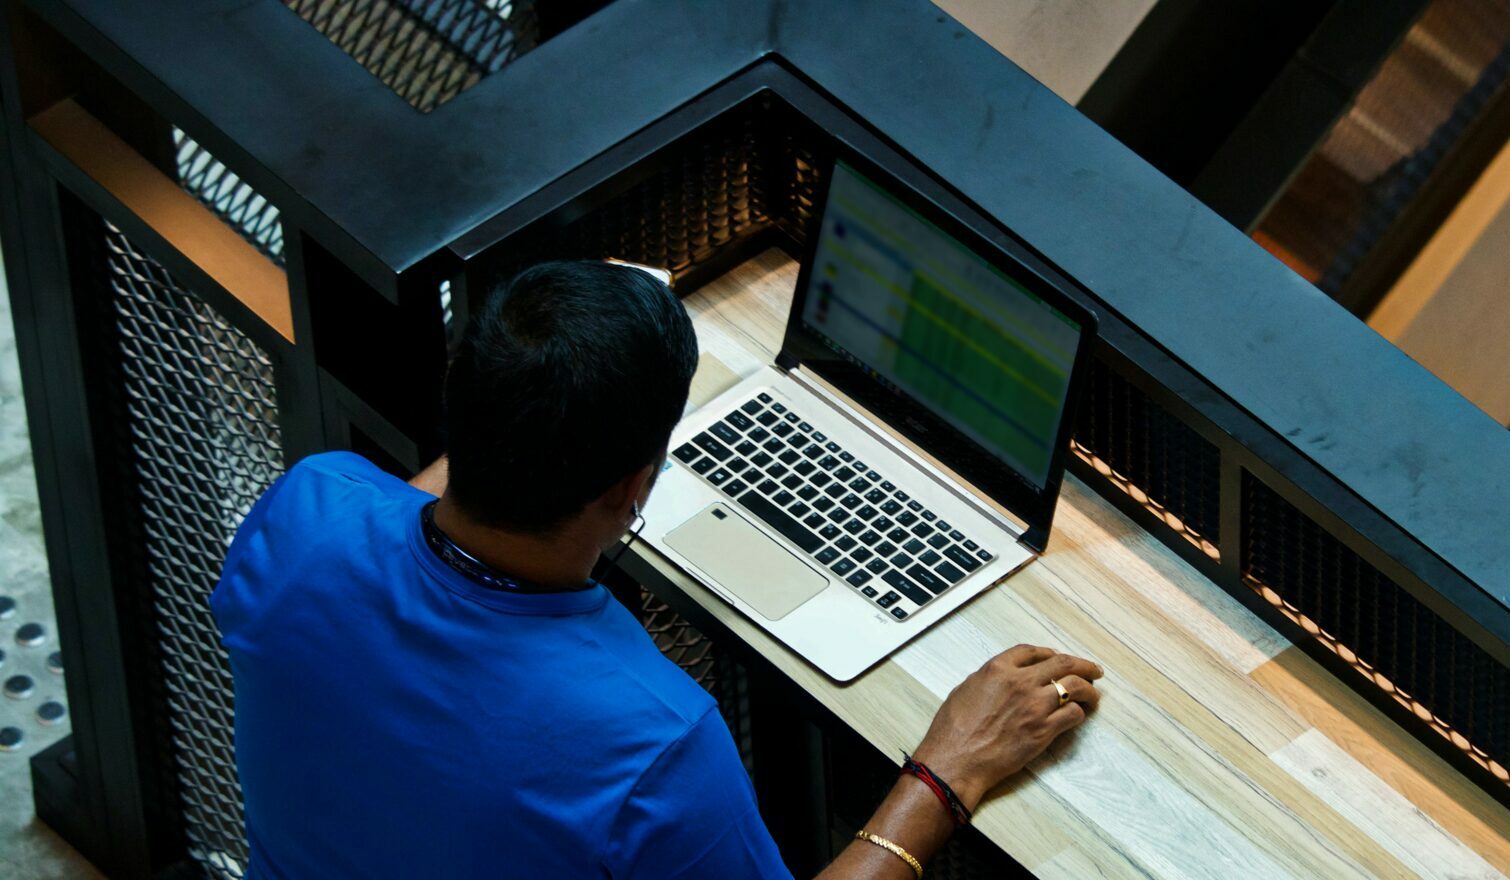 A man with a blue t shirt on and dark hair sitting at a desk with his laptop open, with a blurry spreadsheet on screen.